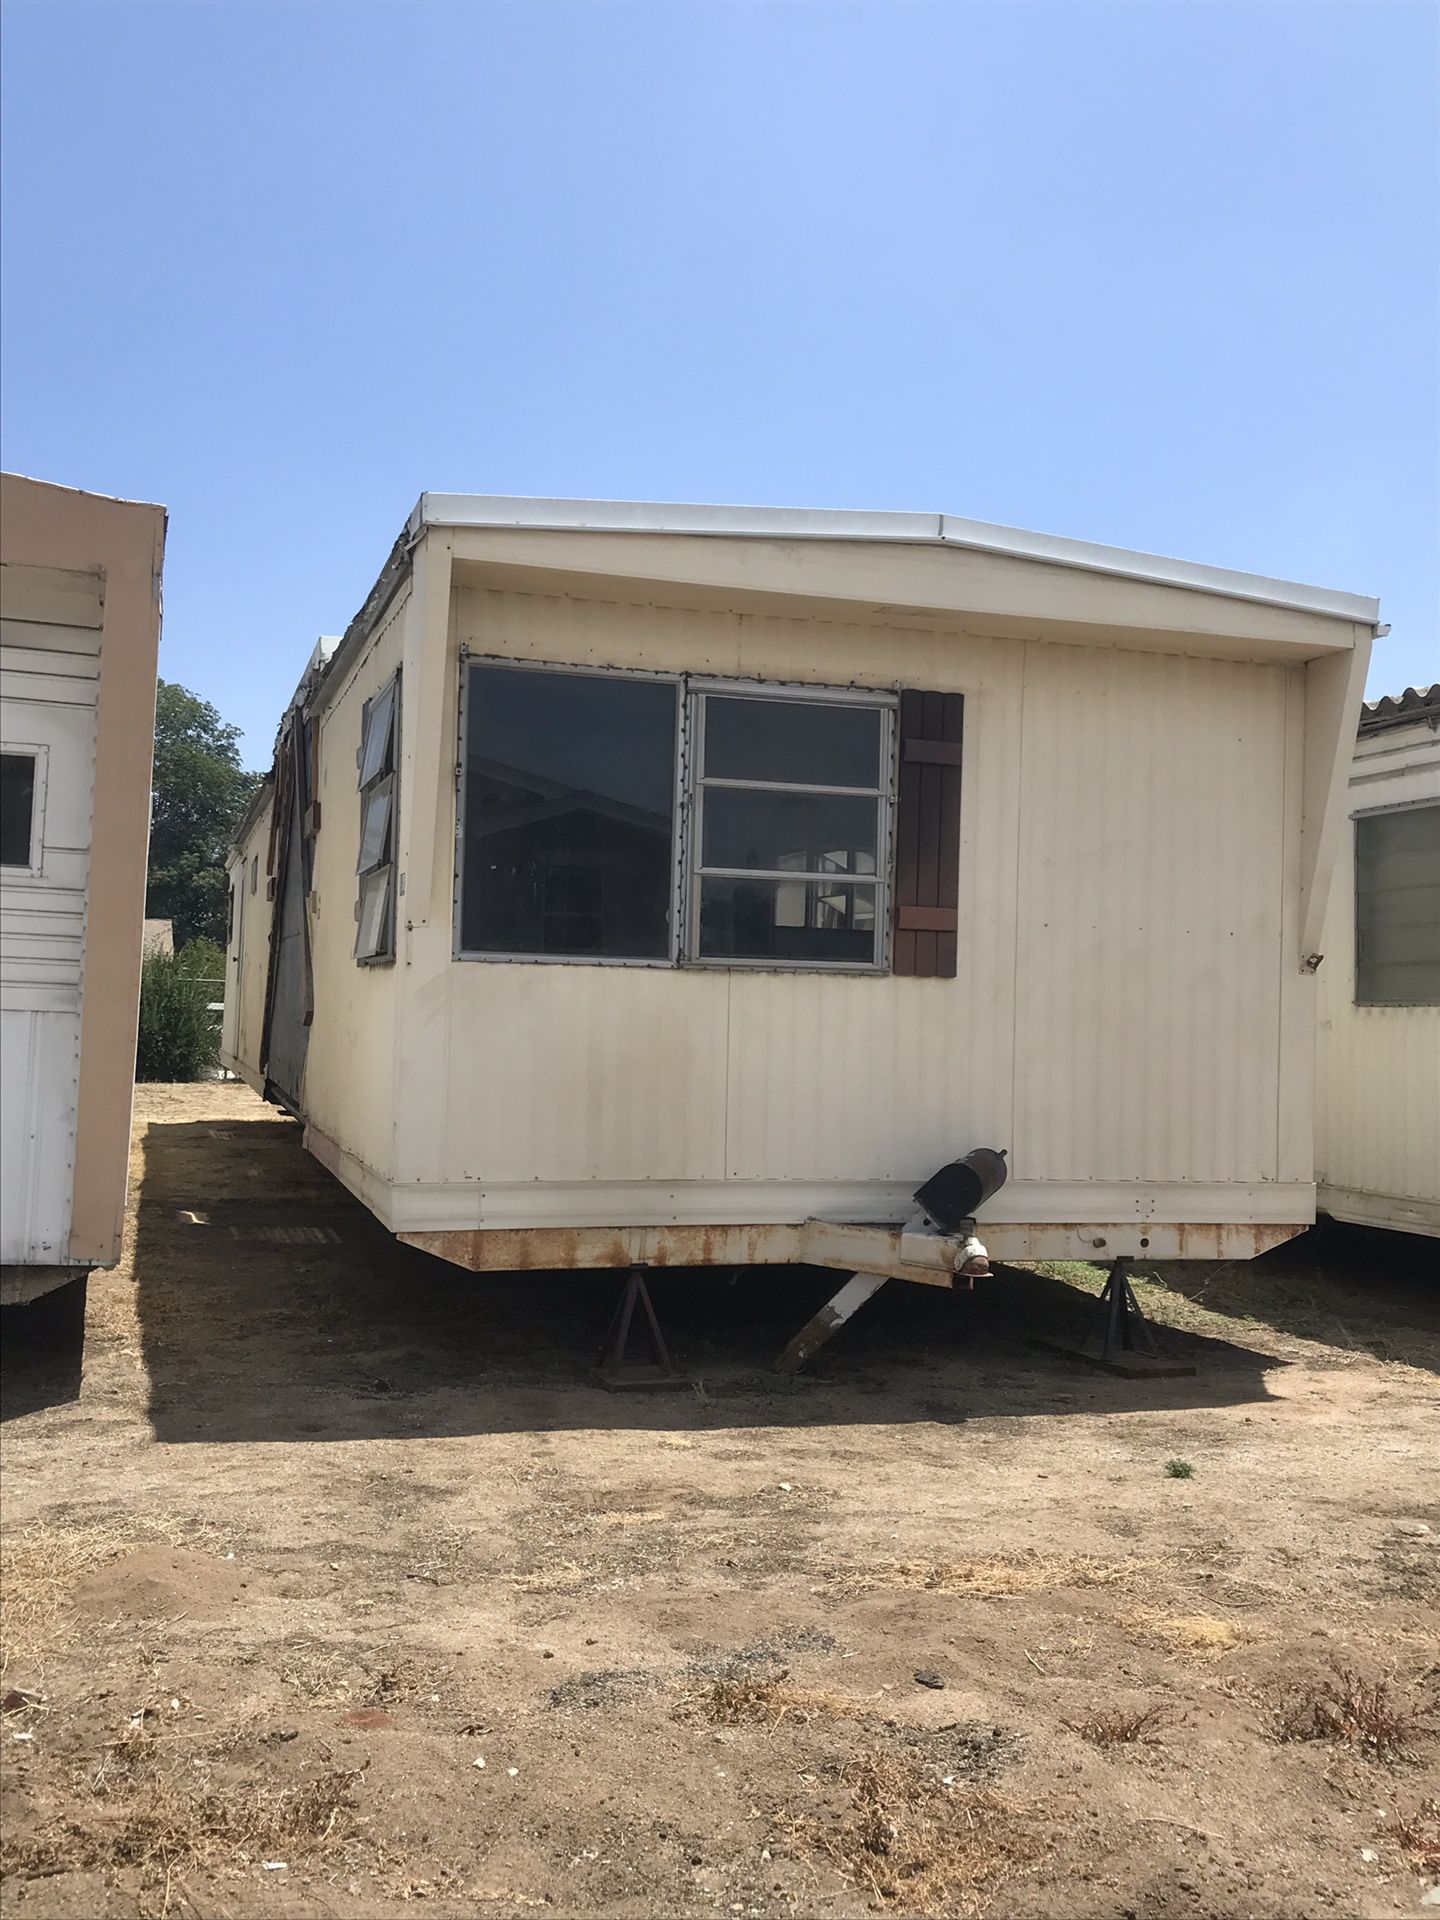 Used Mobile Homes For Sale for Sale in Riverside, CA - OfferUp